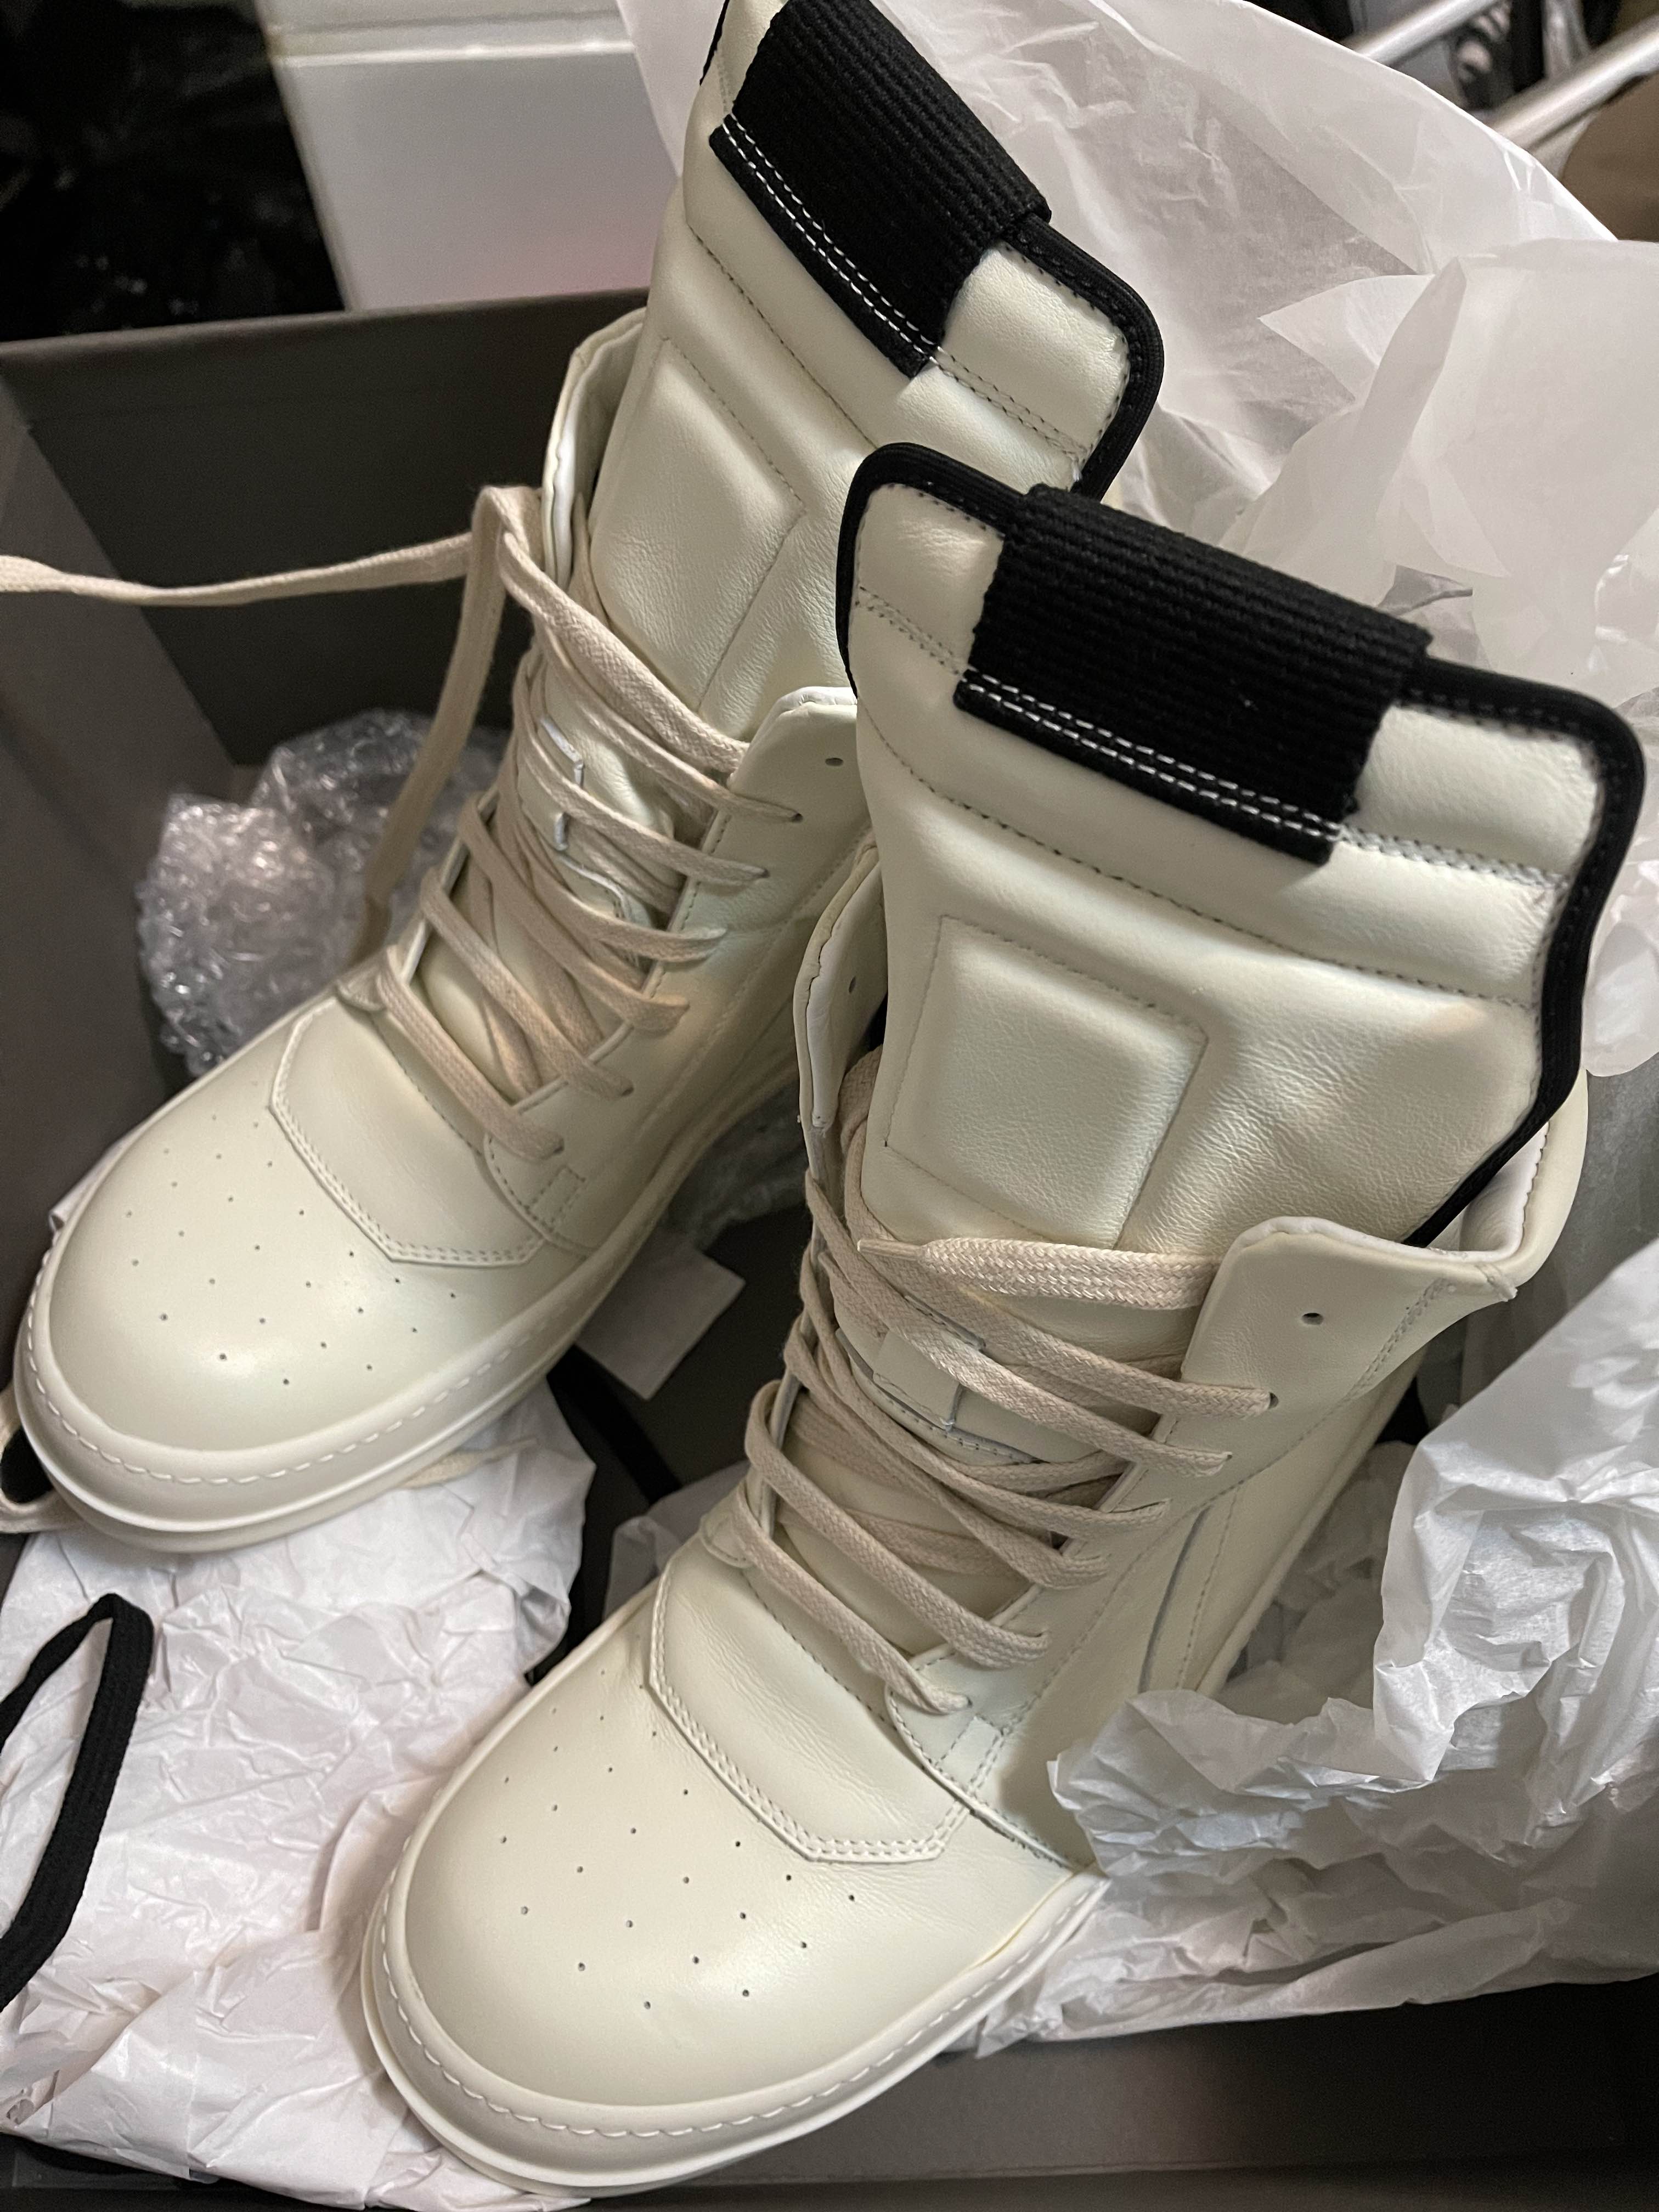 Geobasket Off-White High Top Sneakers 40.5 - 3